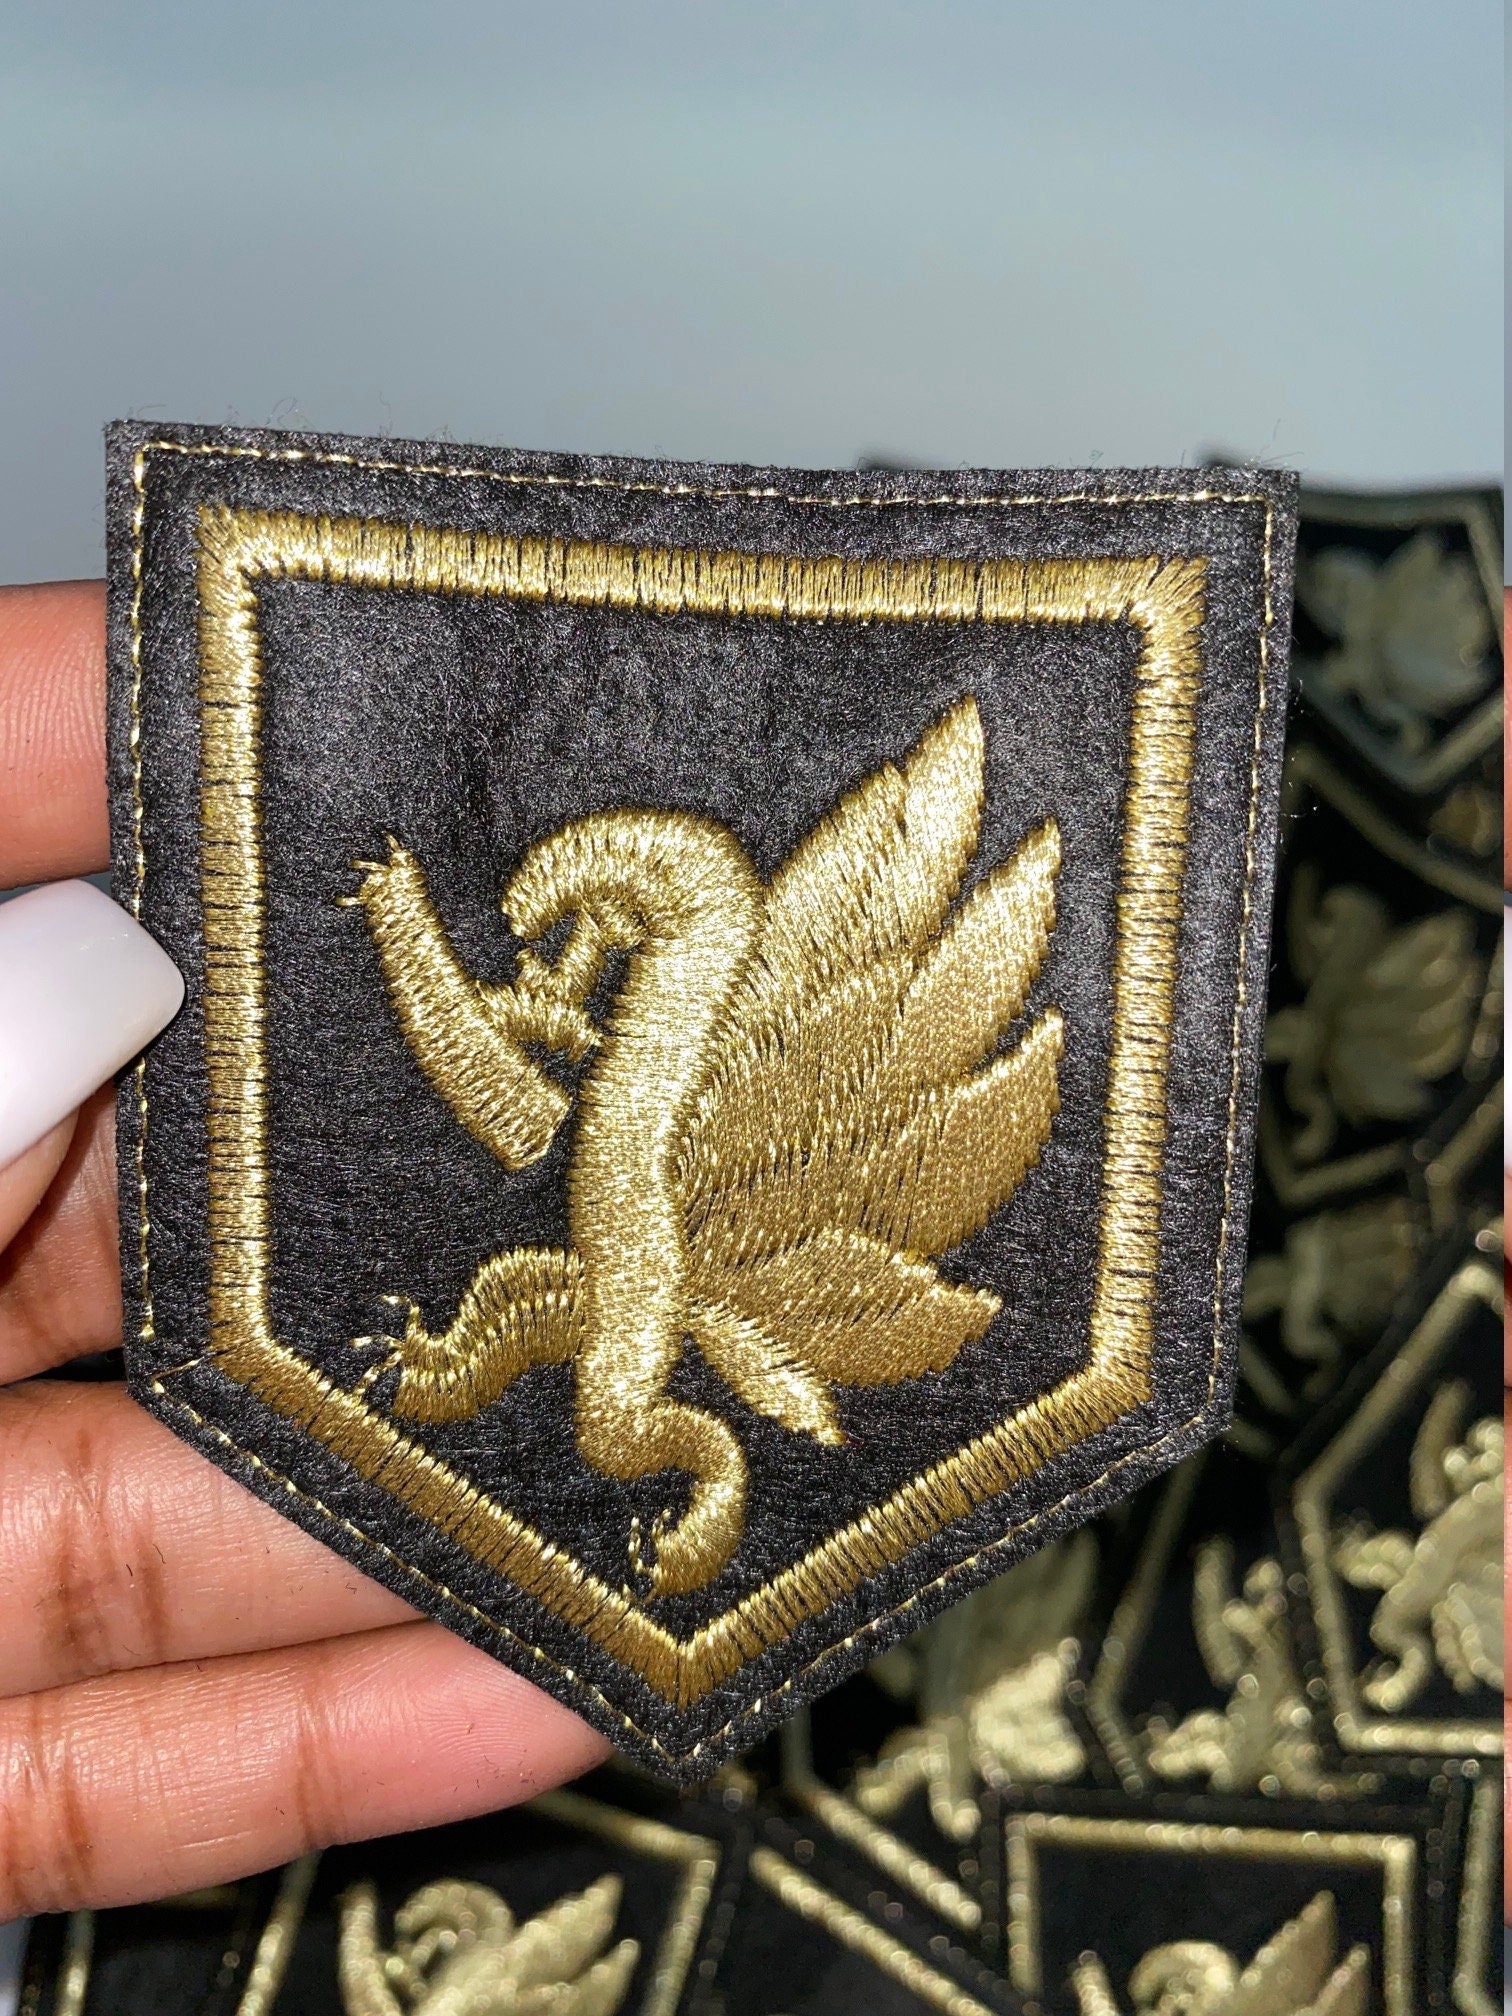 NEW ARRIVAL,Premium Quality, Royalty Crest, Gold and Black Metallic Emblem patch, DIY, Embroidered Applique Iron On Patch, Size 3"